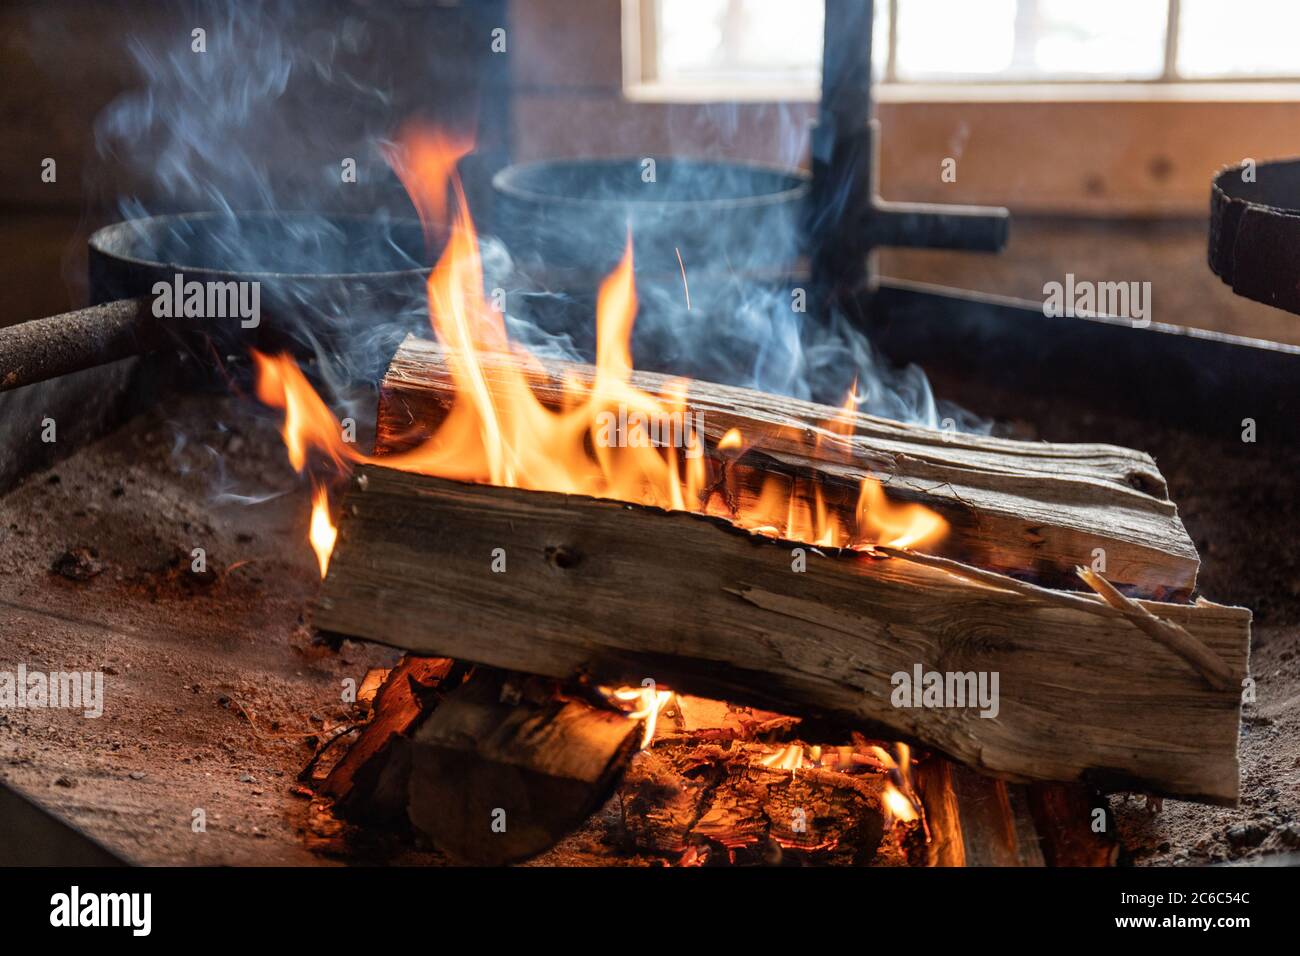 Firewood burning at open fire grilling place Stock Photo